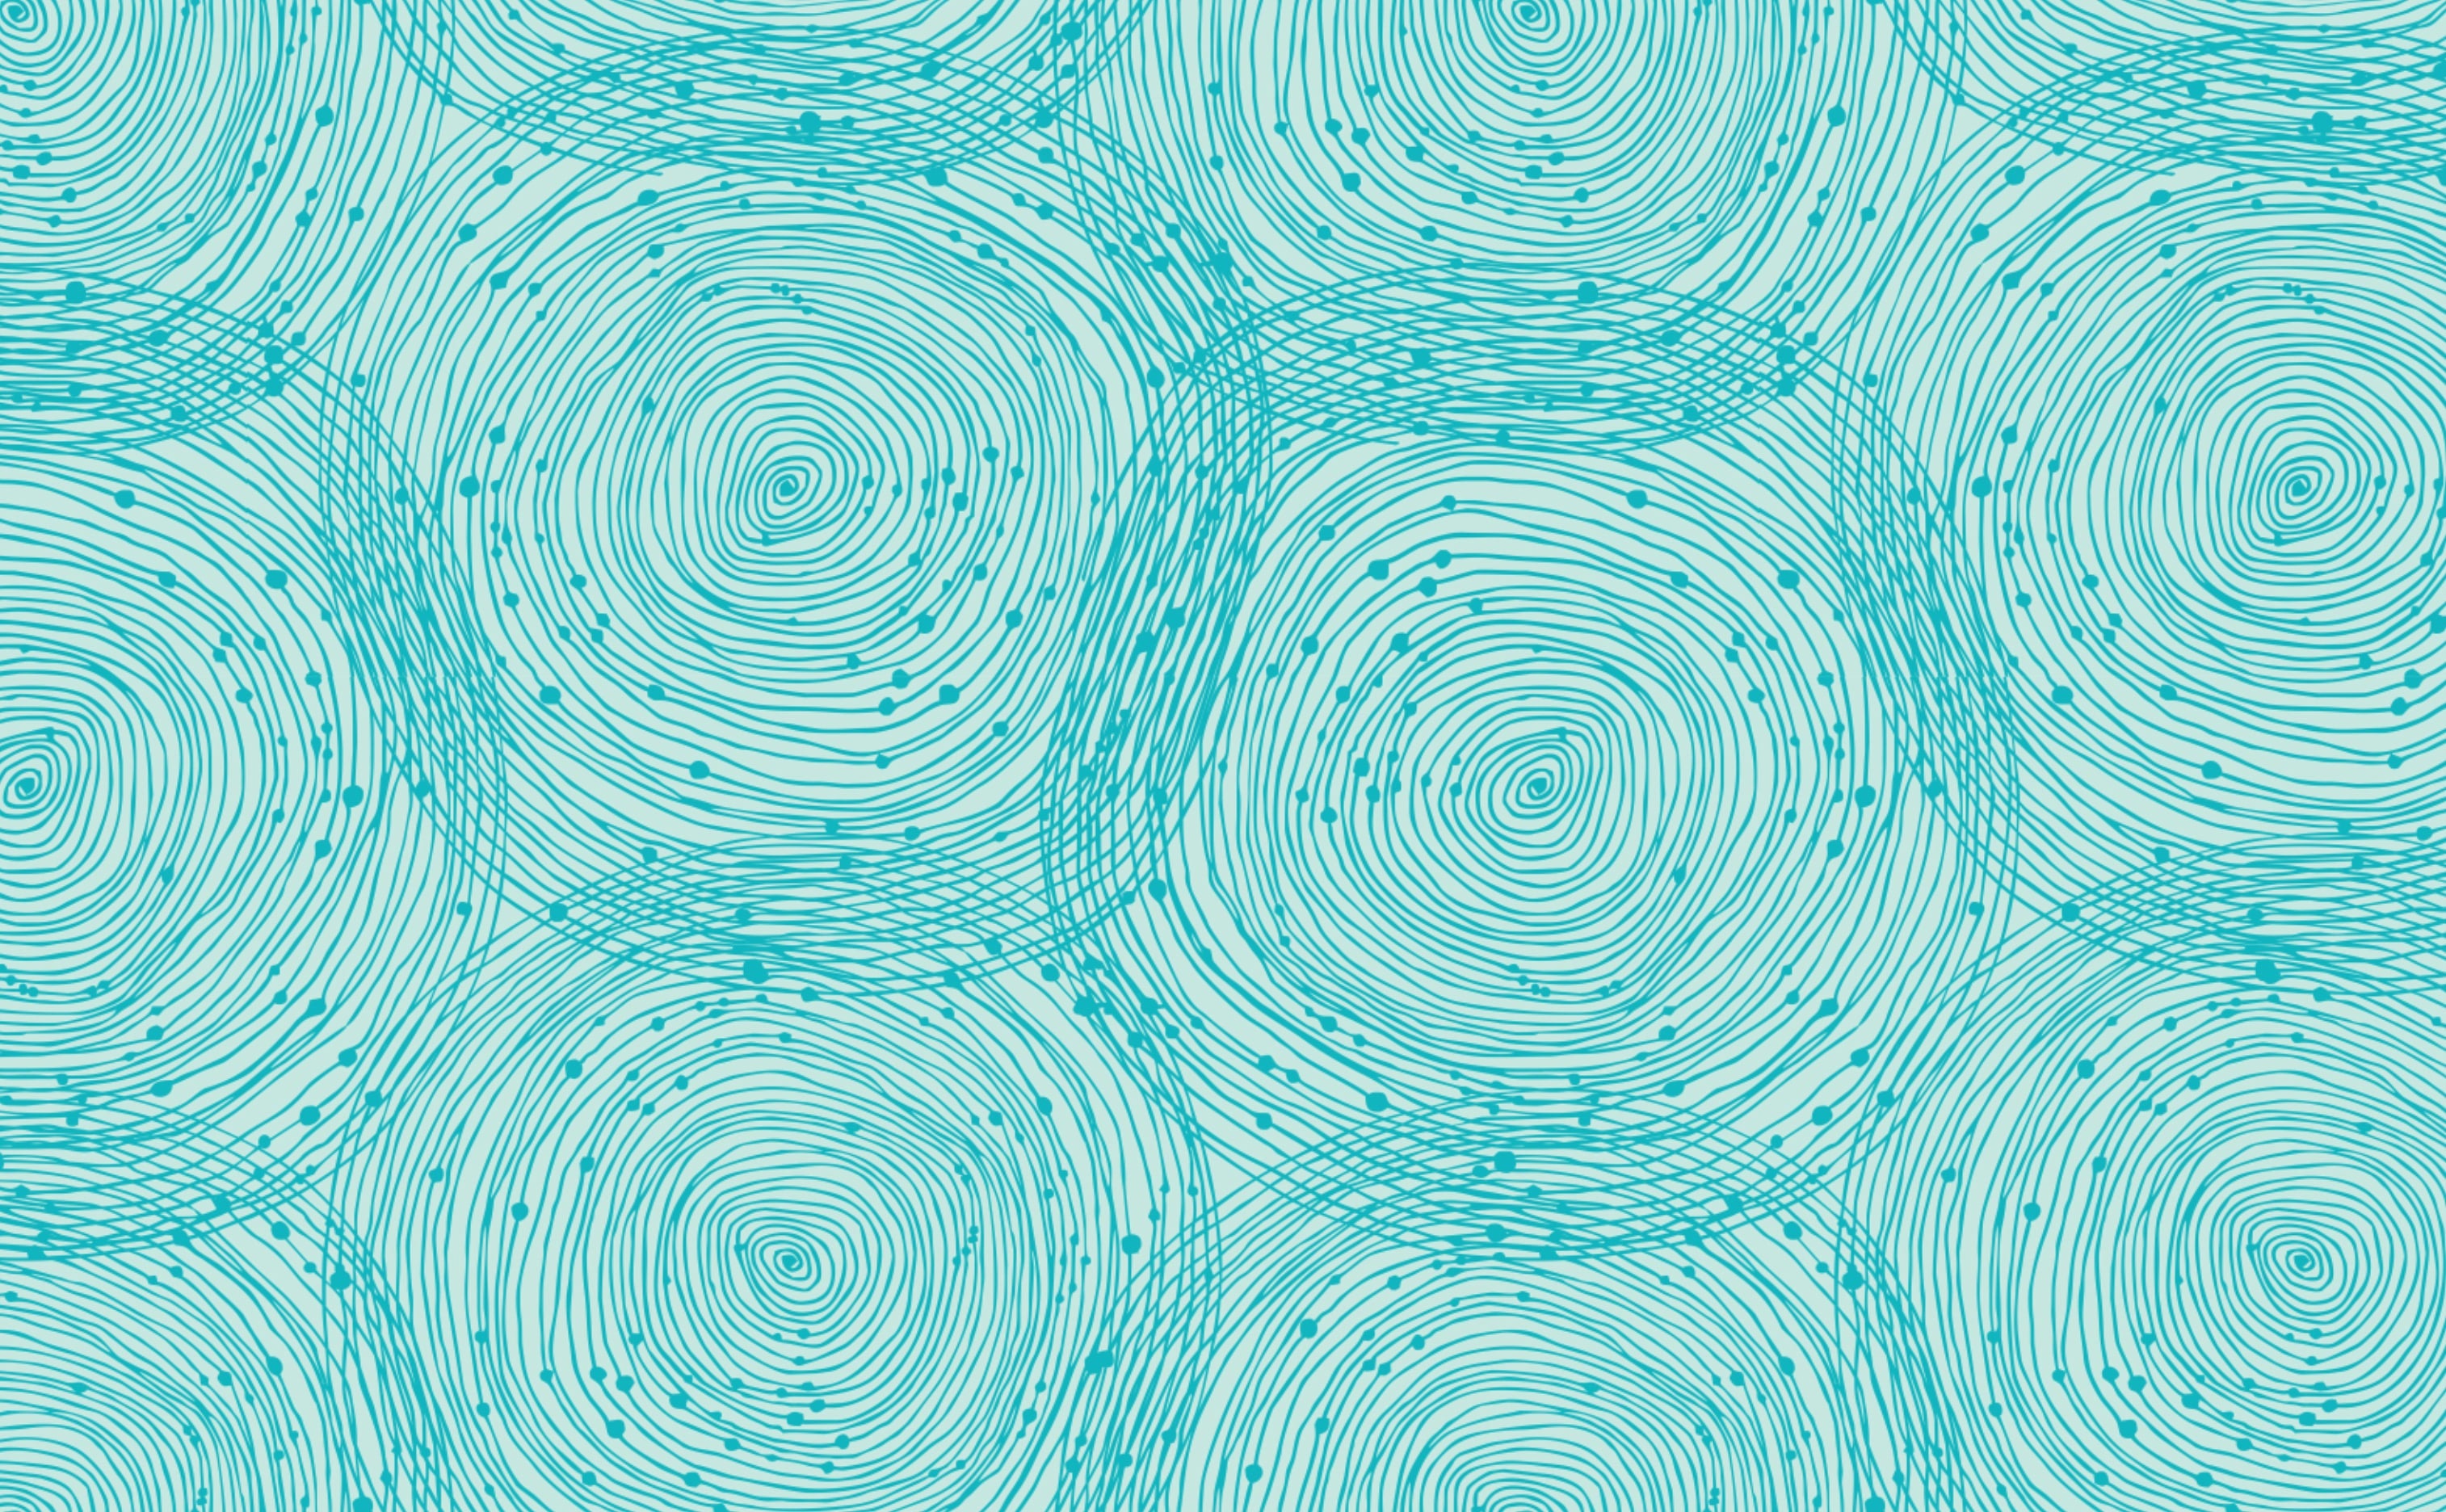 Concentric Circles Wallpaper For Walls Turquoise Spirals